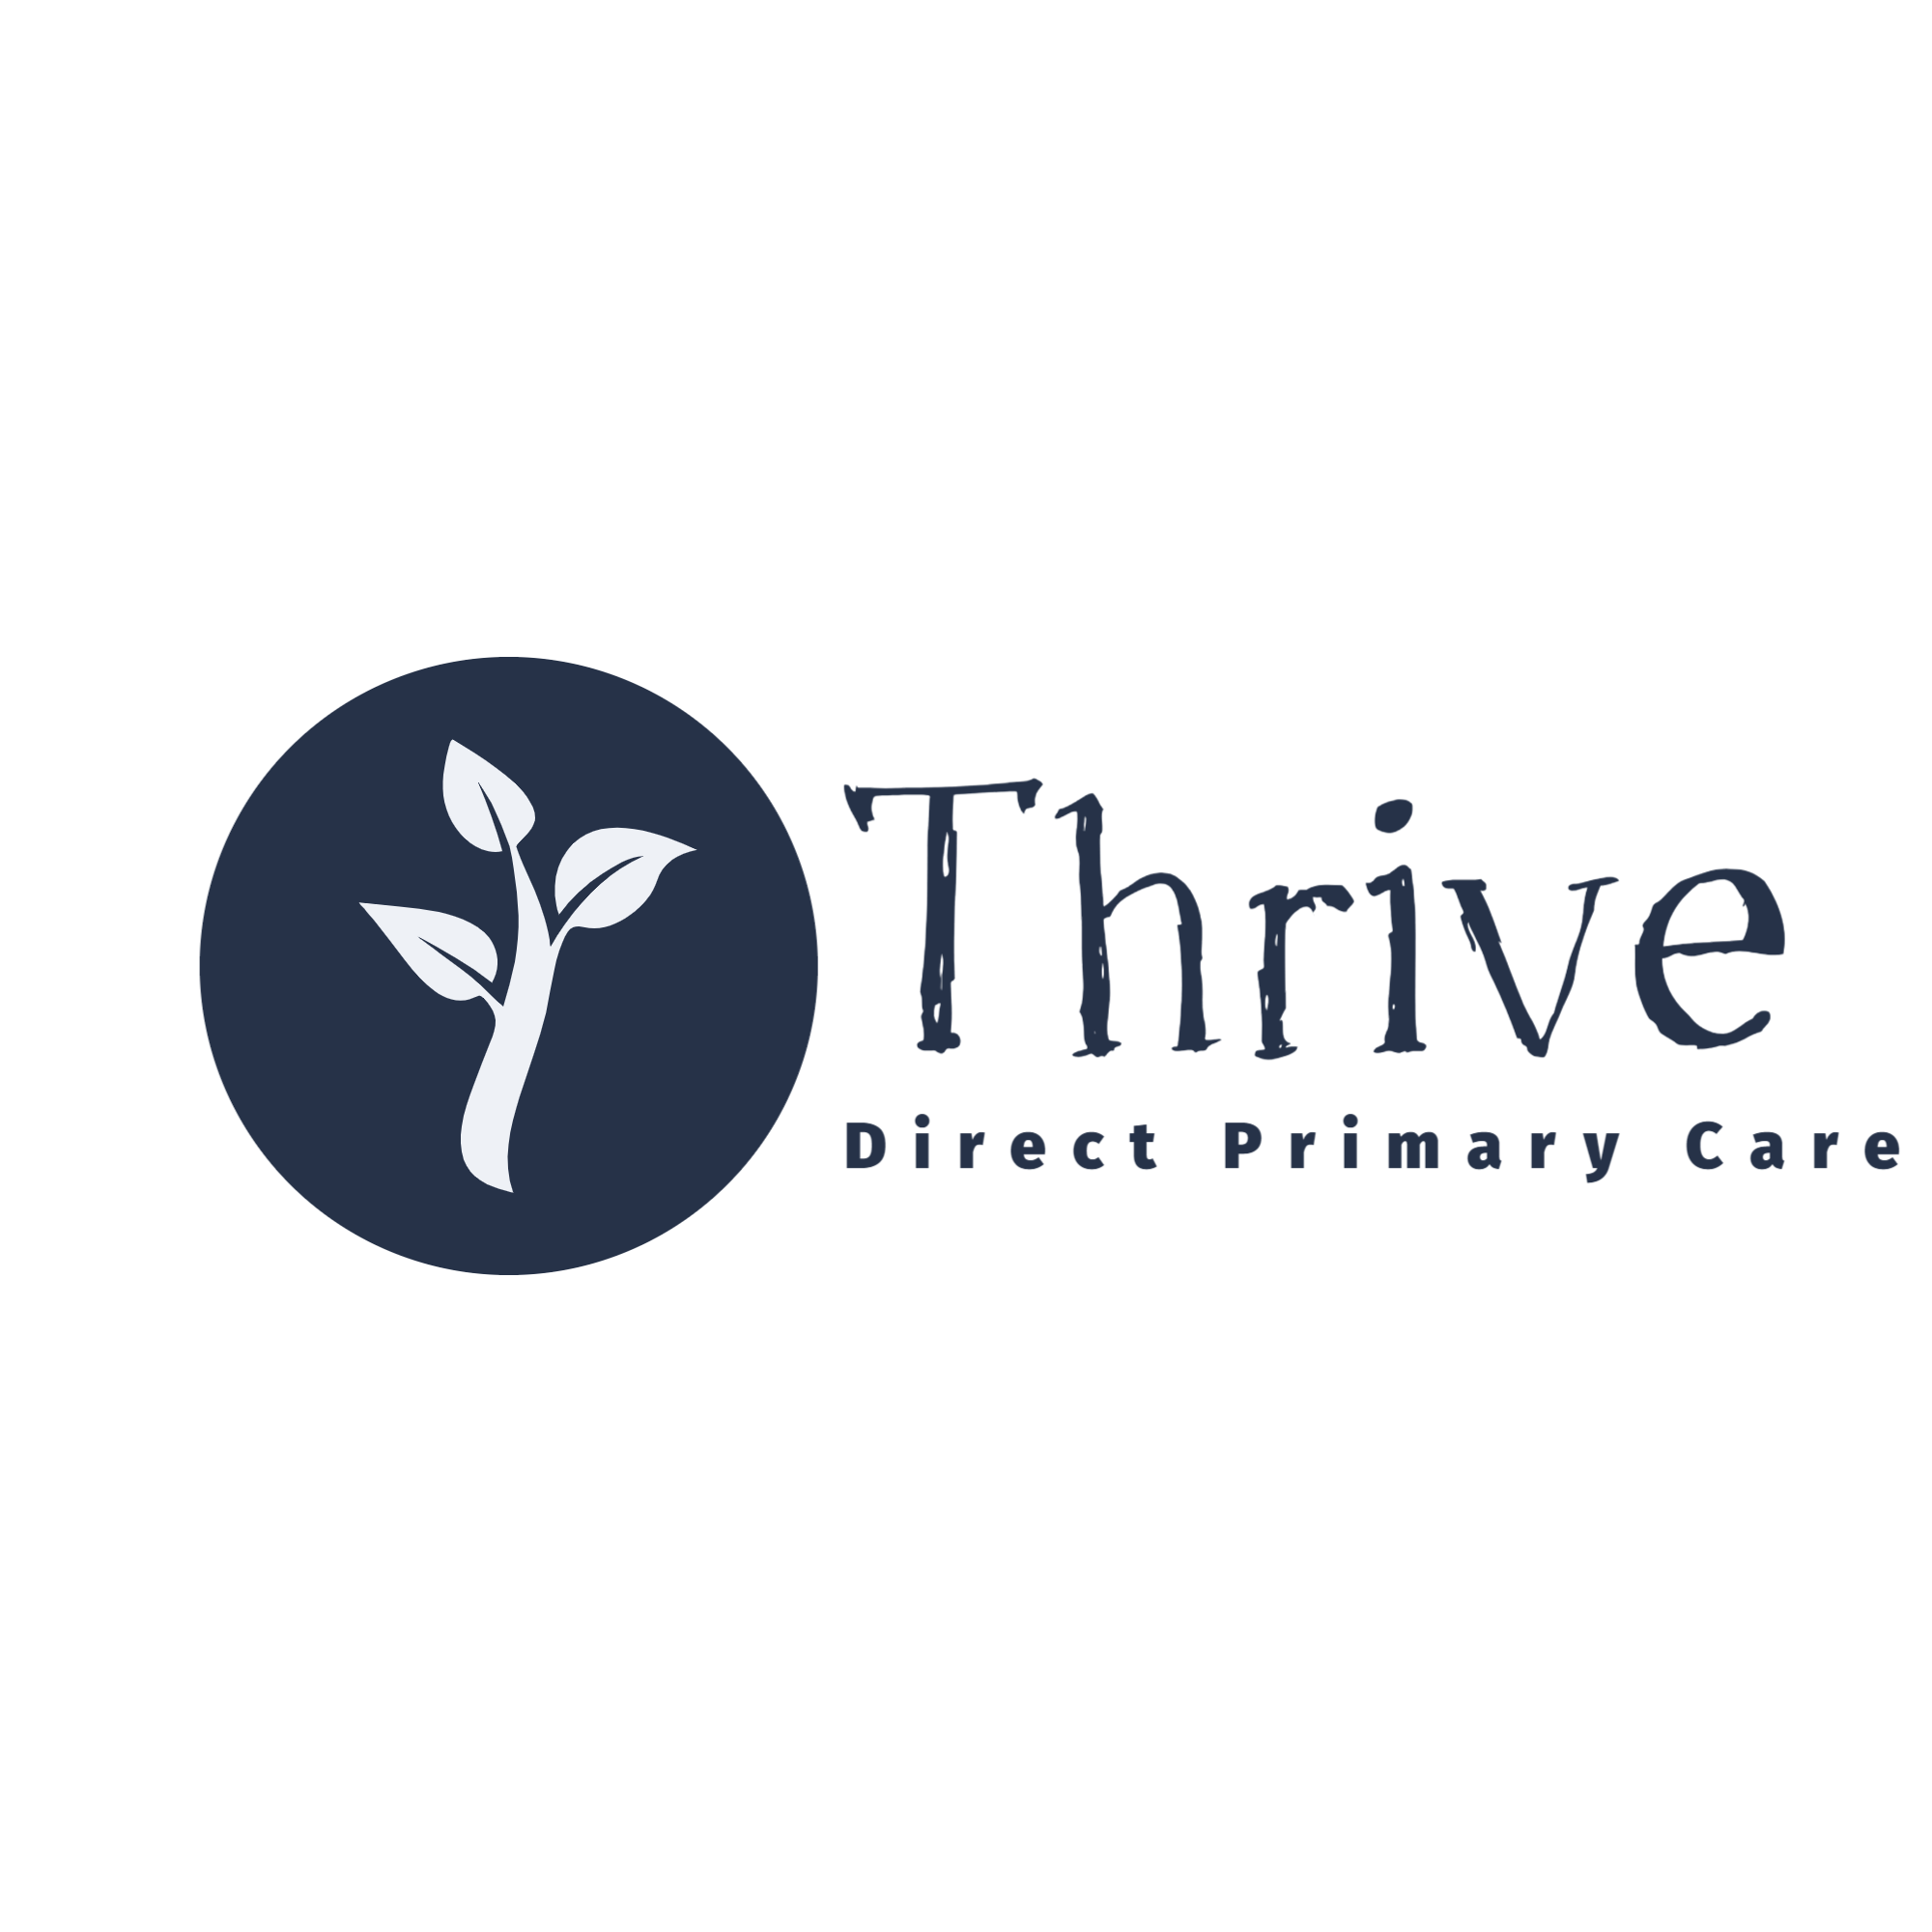 Thrive Direct Primary Care